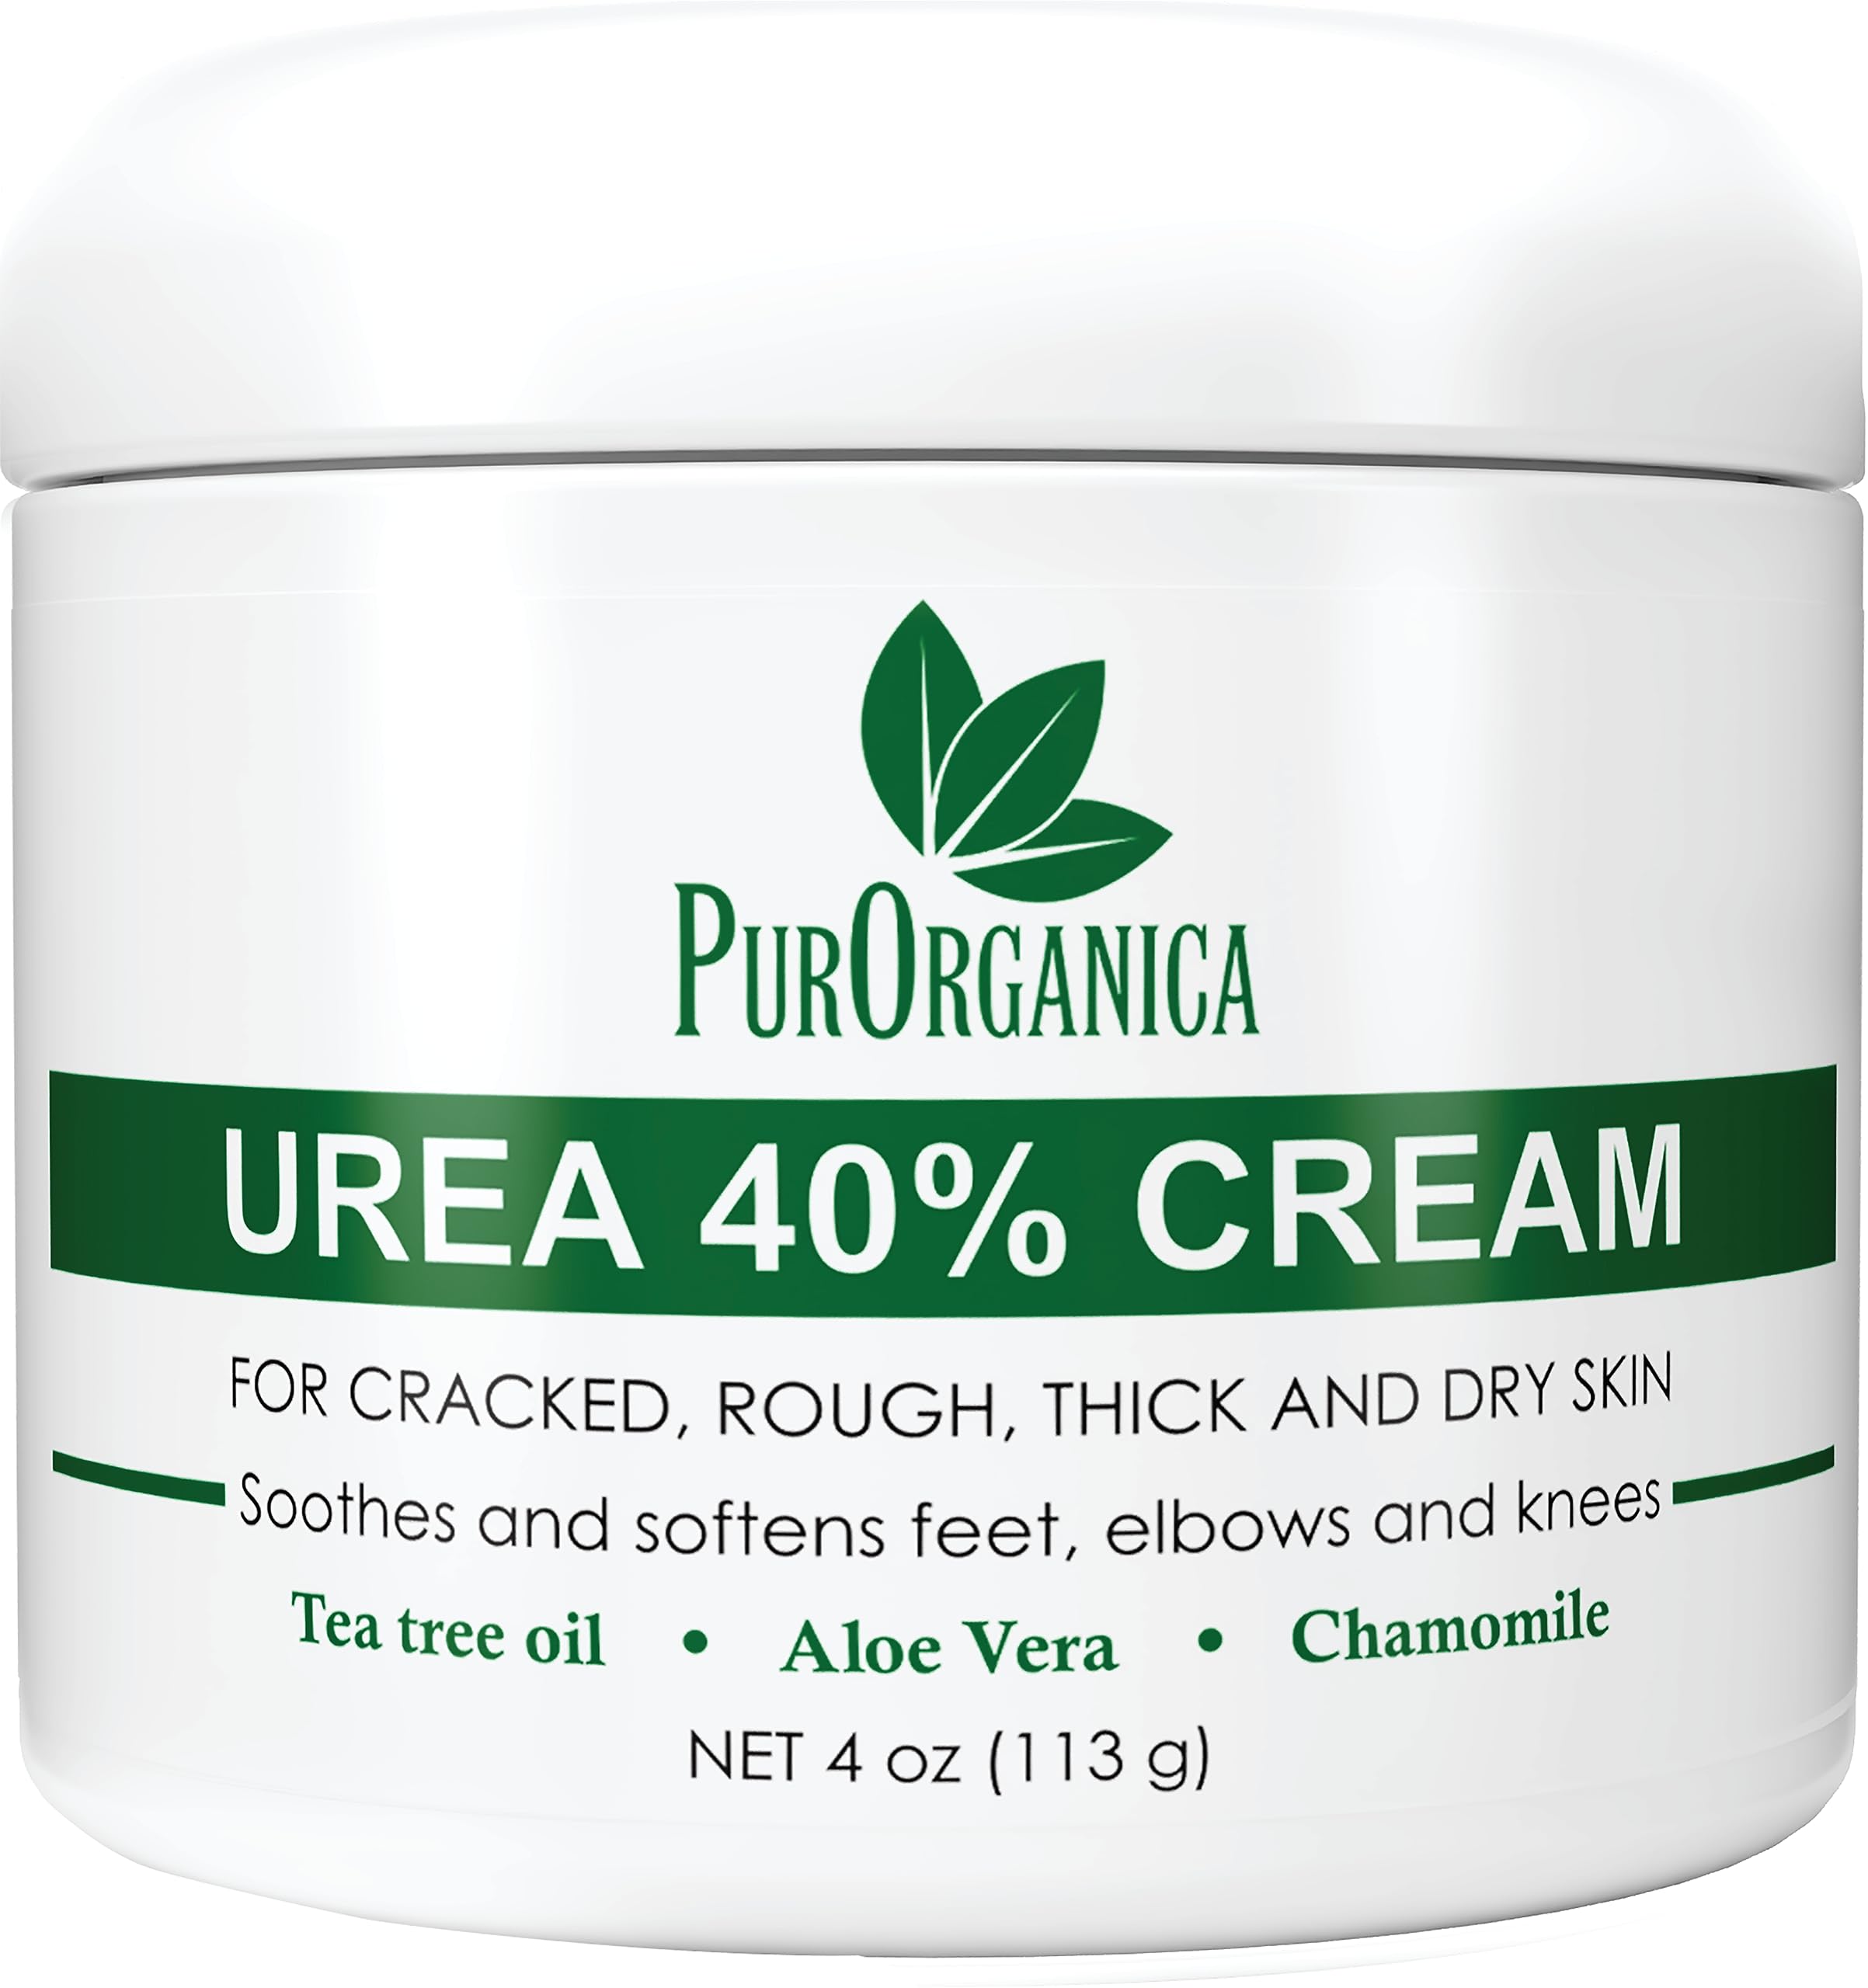 PurOrganica Urea 40% Foot Cream - Corn, Callus and Dead Skin Remover - Moisturizer & Rehydrater - For Thick, Cracked, Rough, Dead & Dry Skin - For Feet, Elbows and Hands - Made in USA